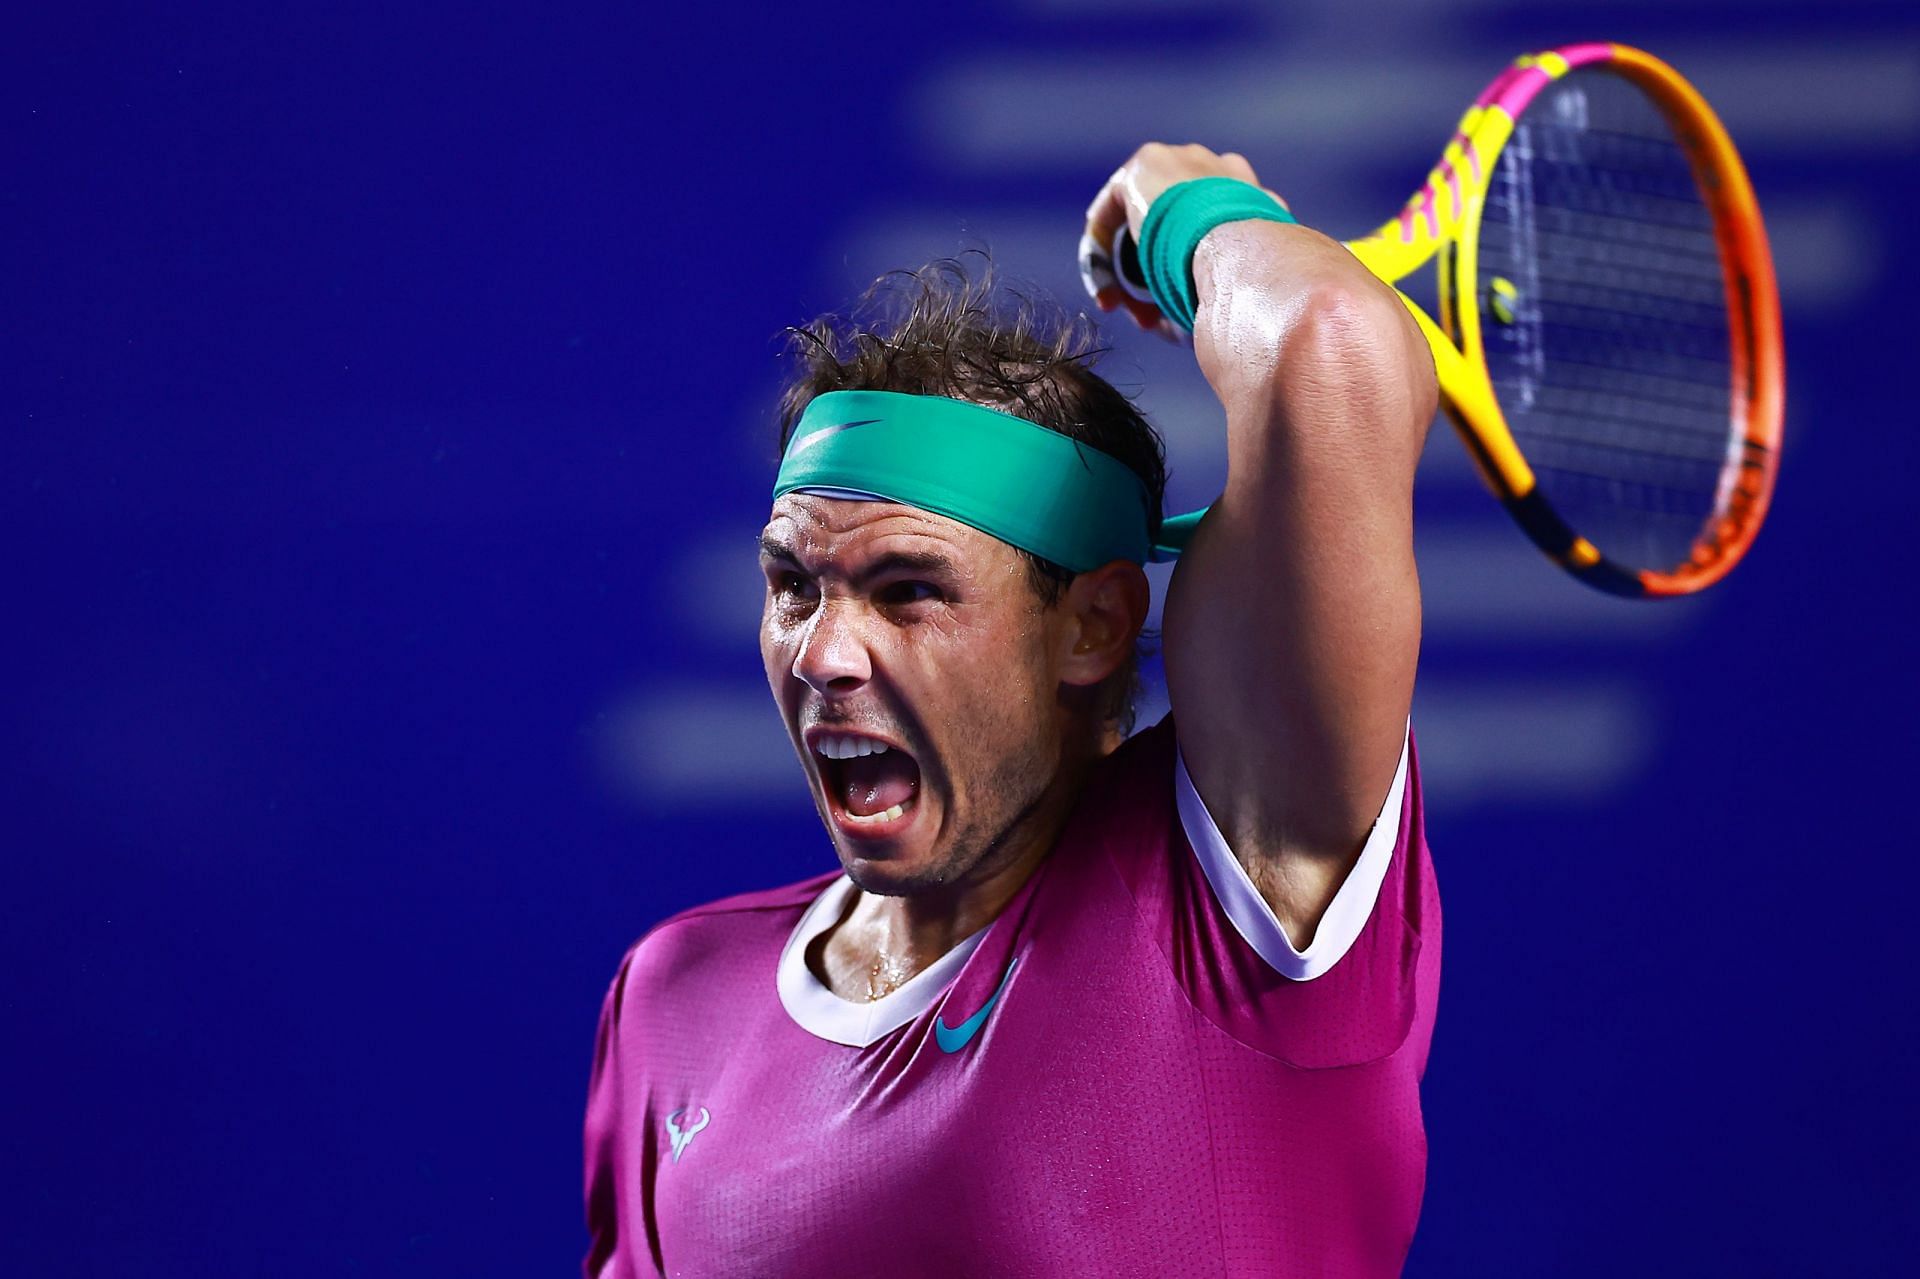 Rafael Nadal has the fourth best winning percentage against top-10 opponents in ATP history